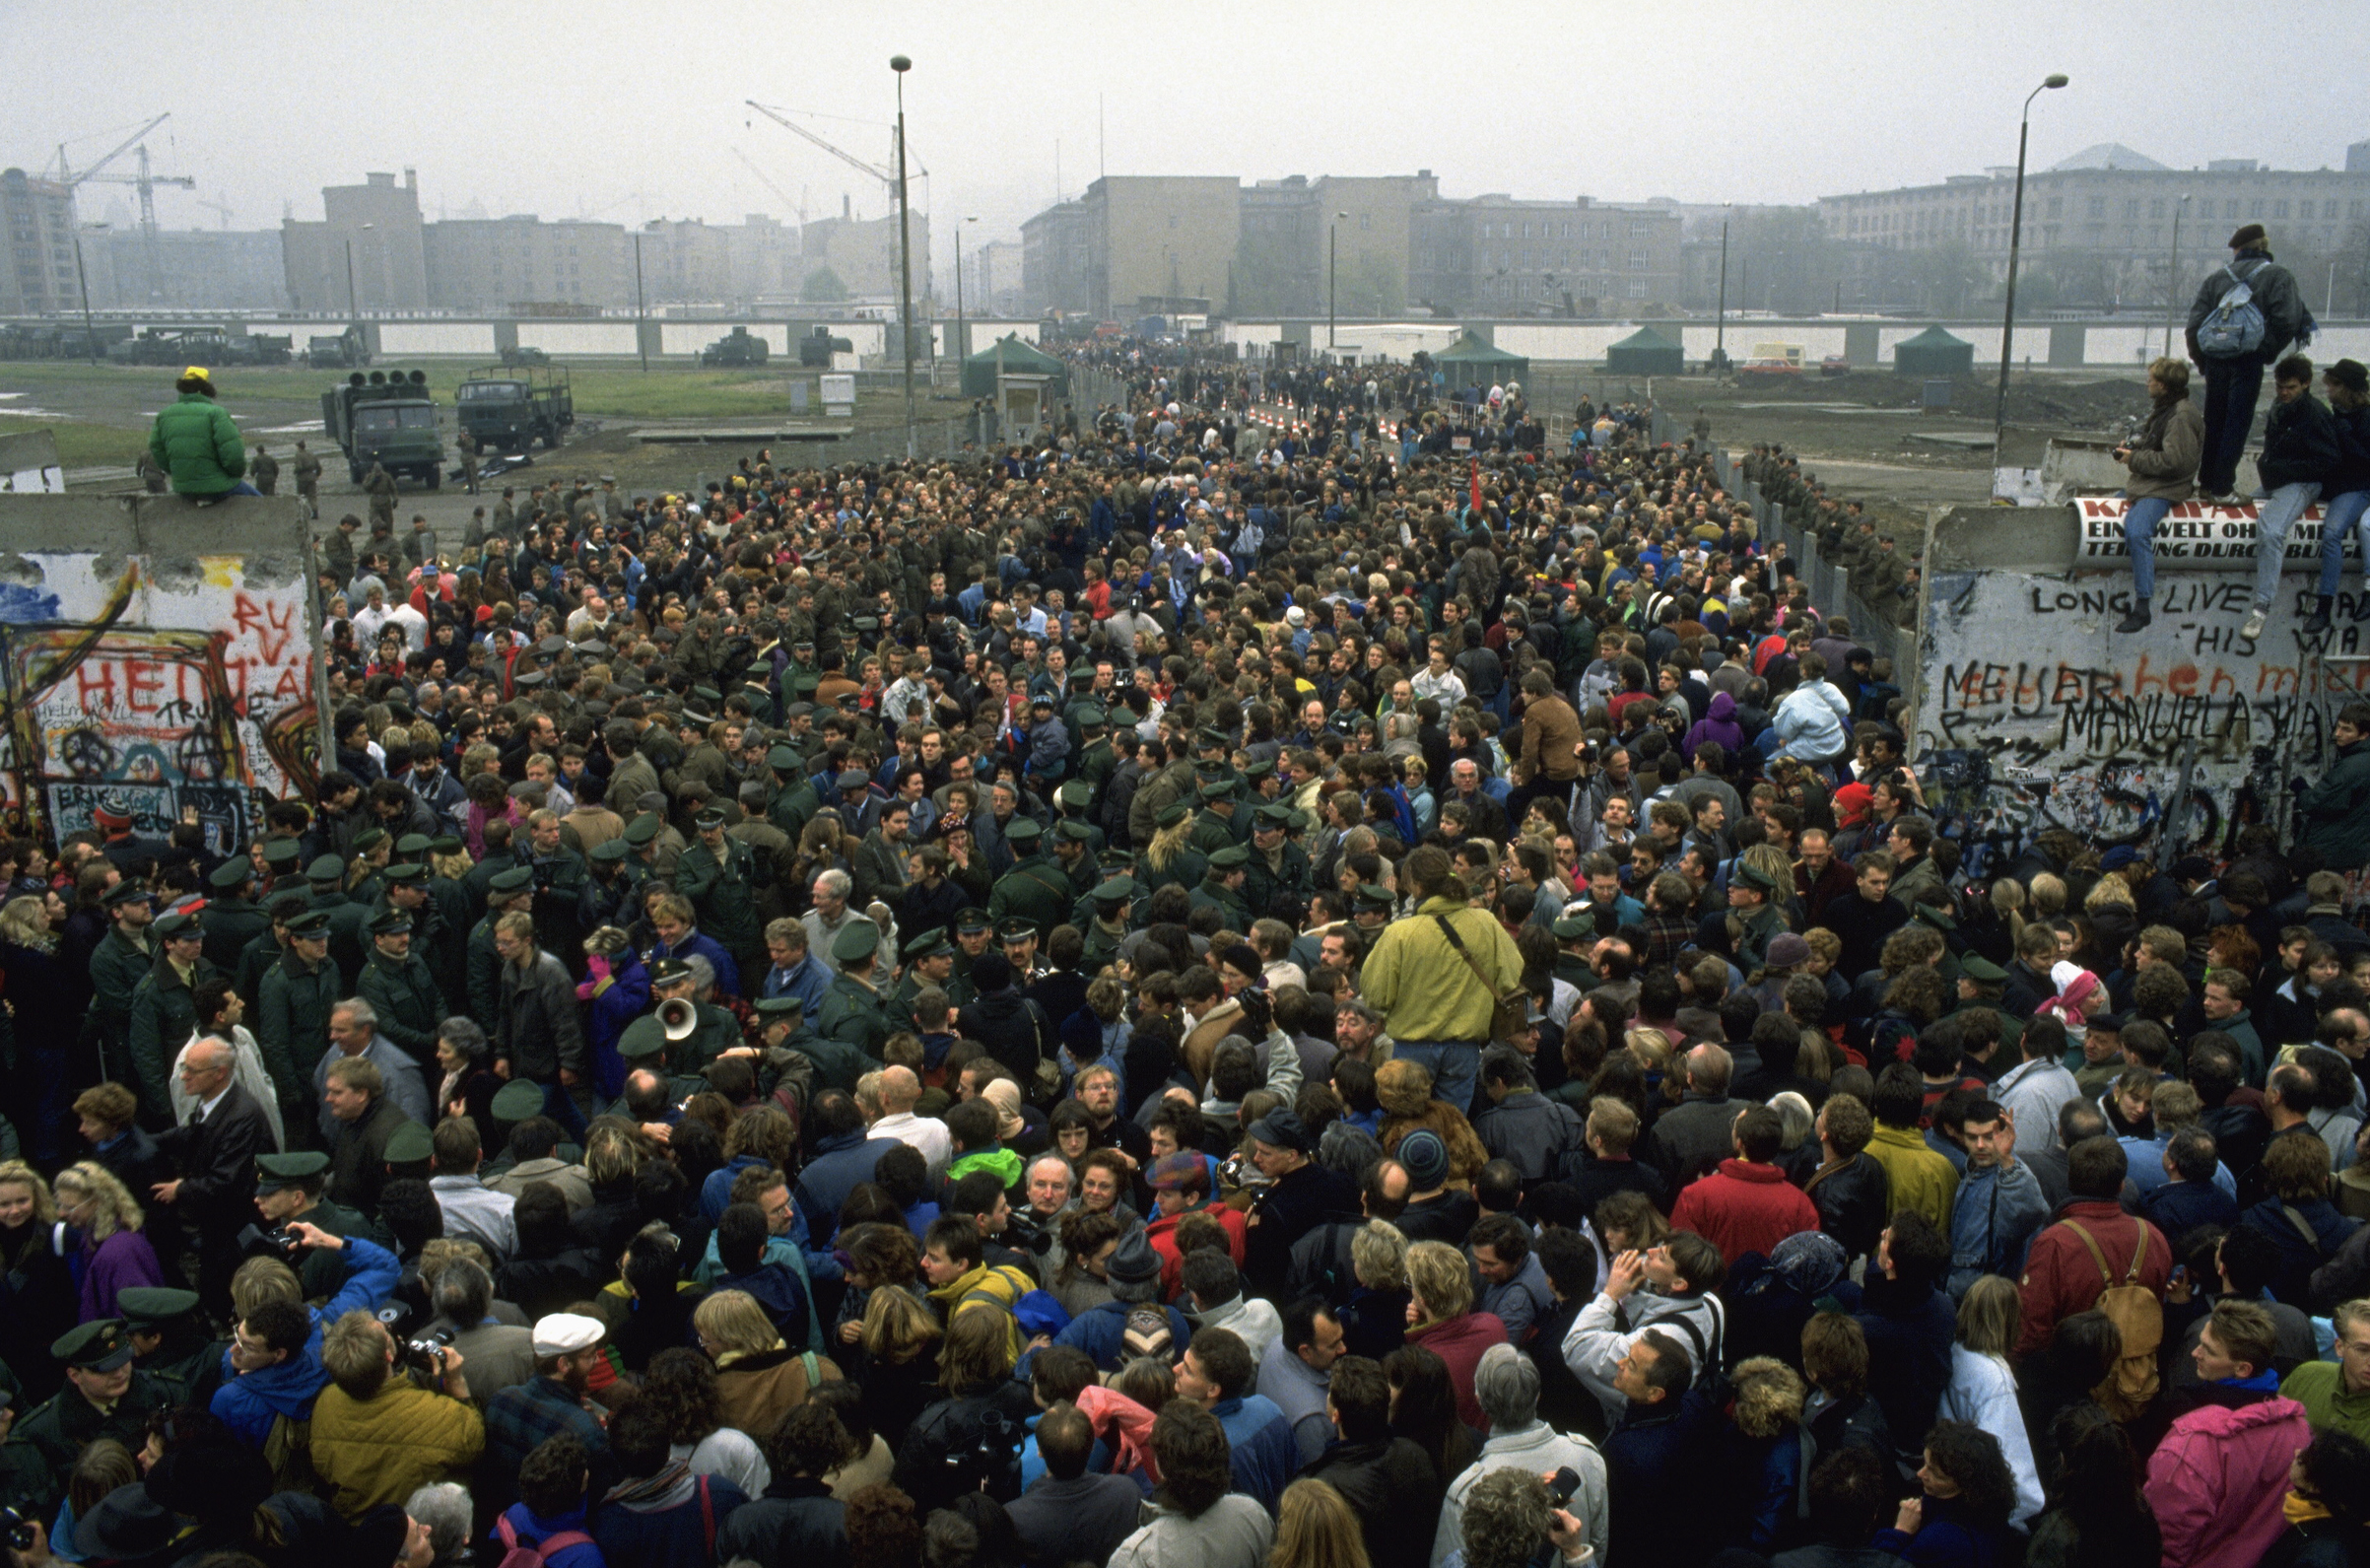 A crowd at the Berlin Wall on Nov. 12, 1989 (Thierry Orban—Sygma via Getty Images)